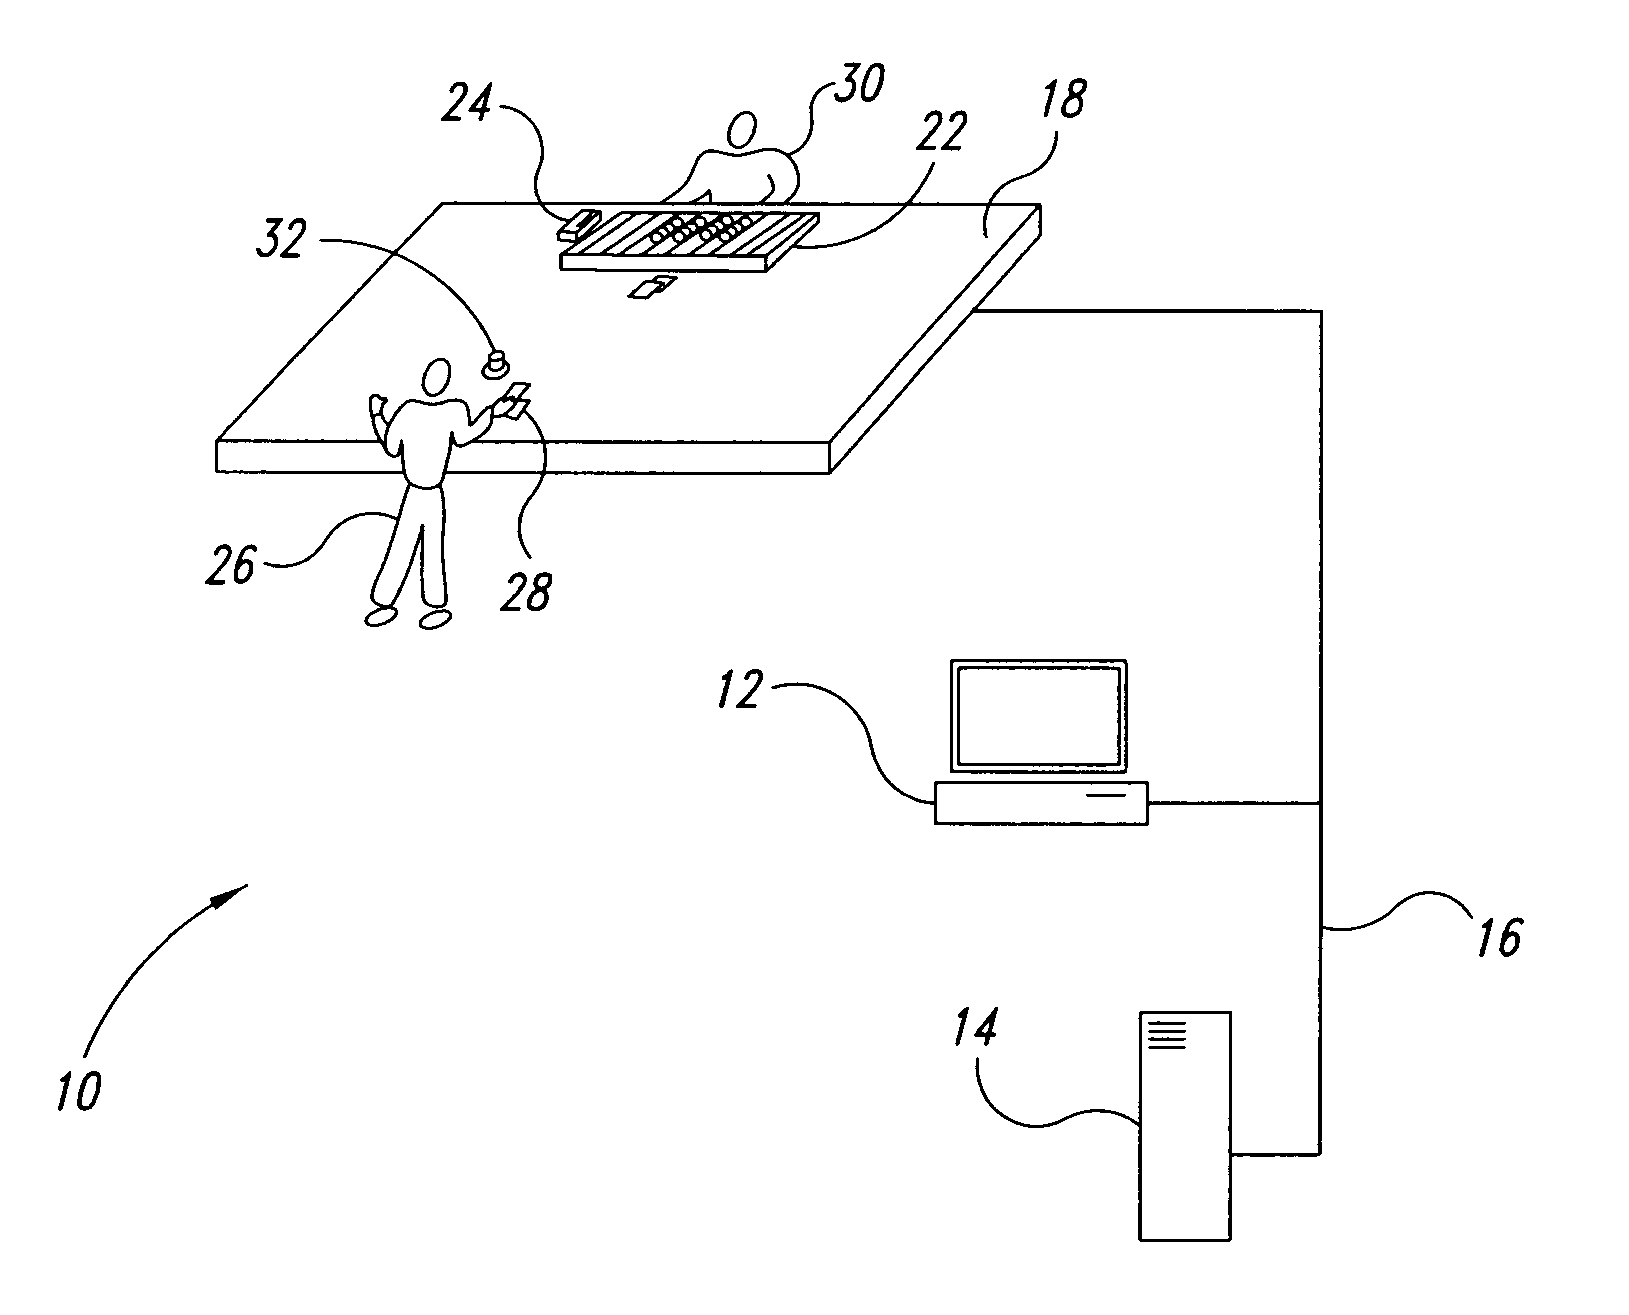 Method, apparatus and article for random sequence generation and playing card distribution